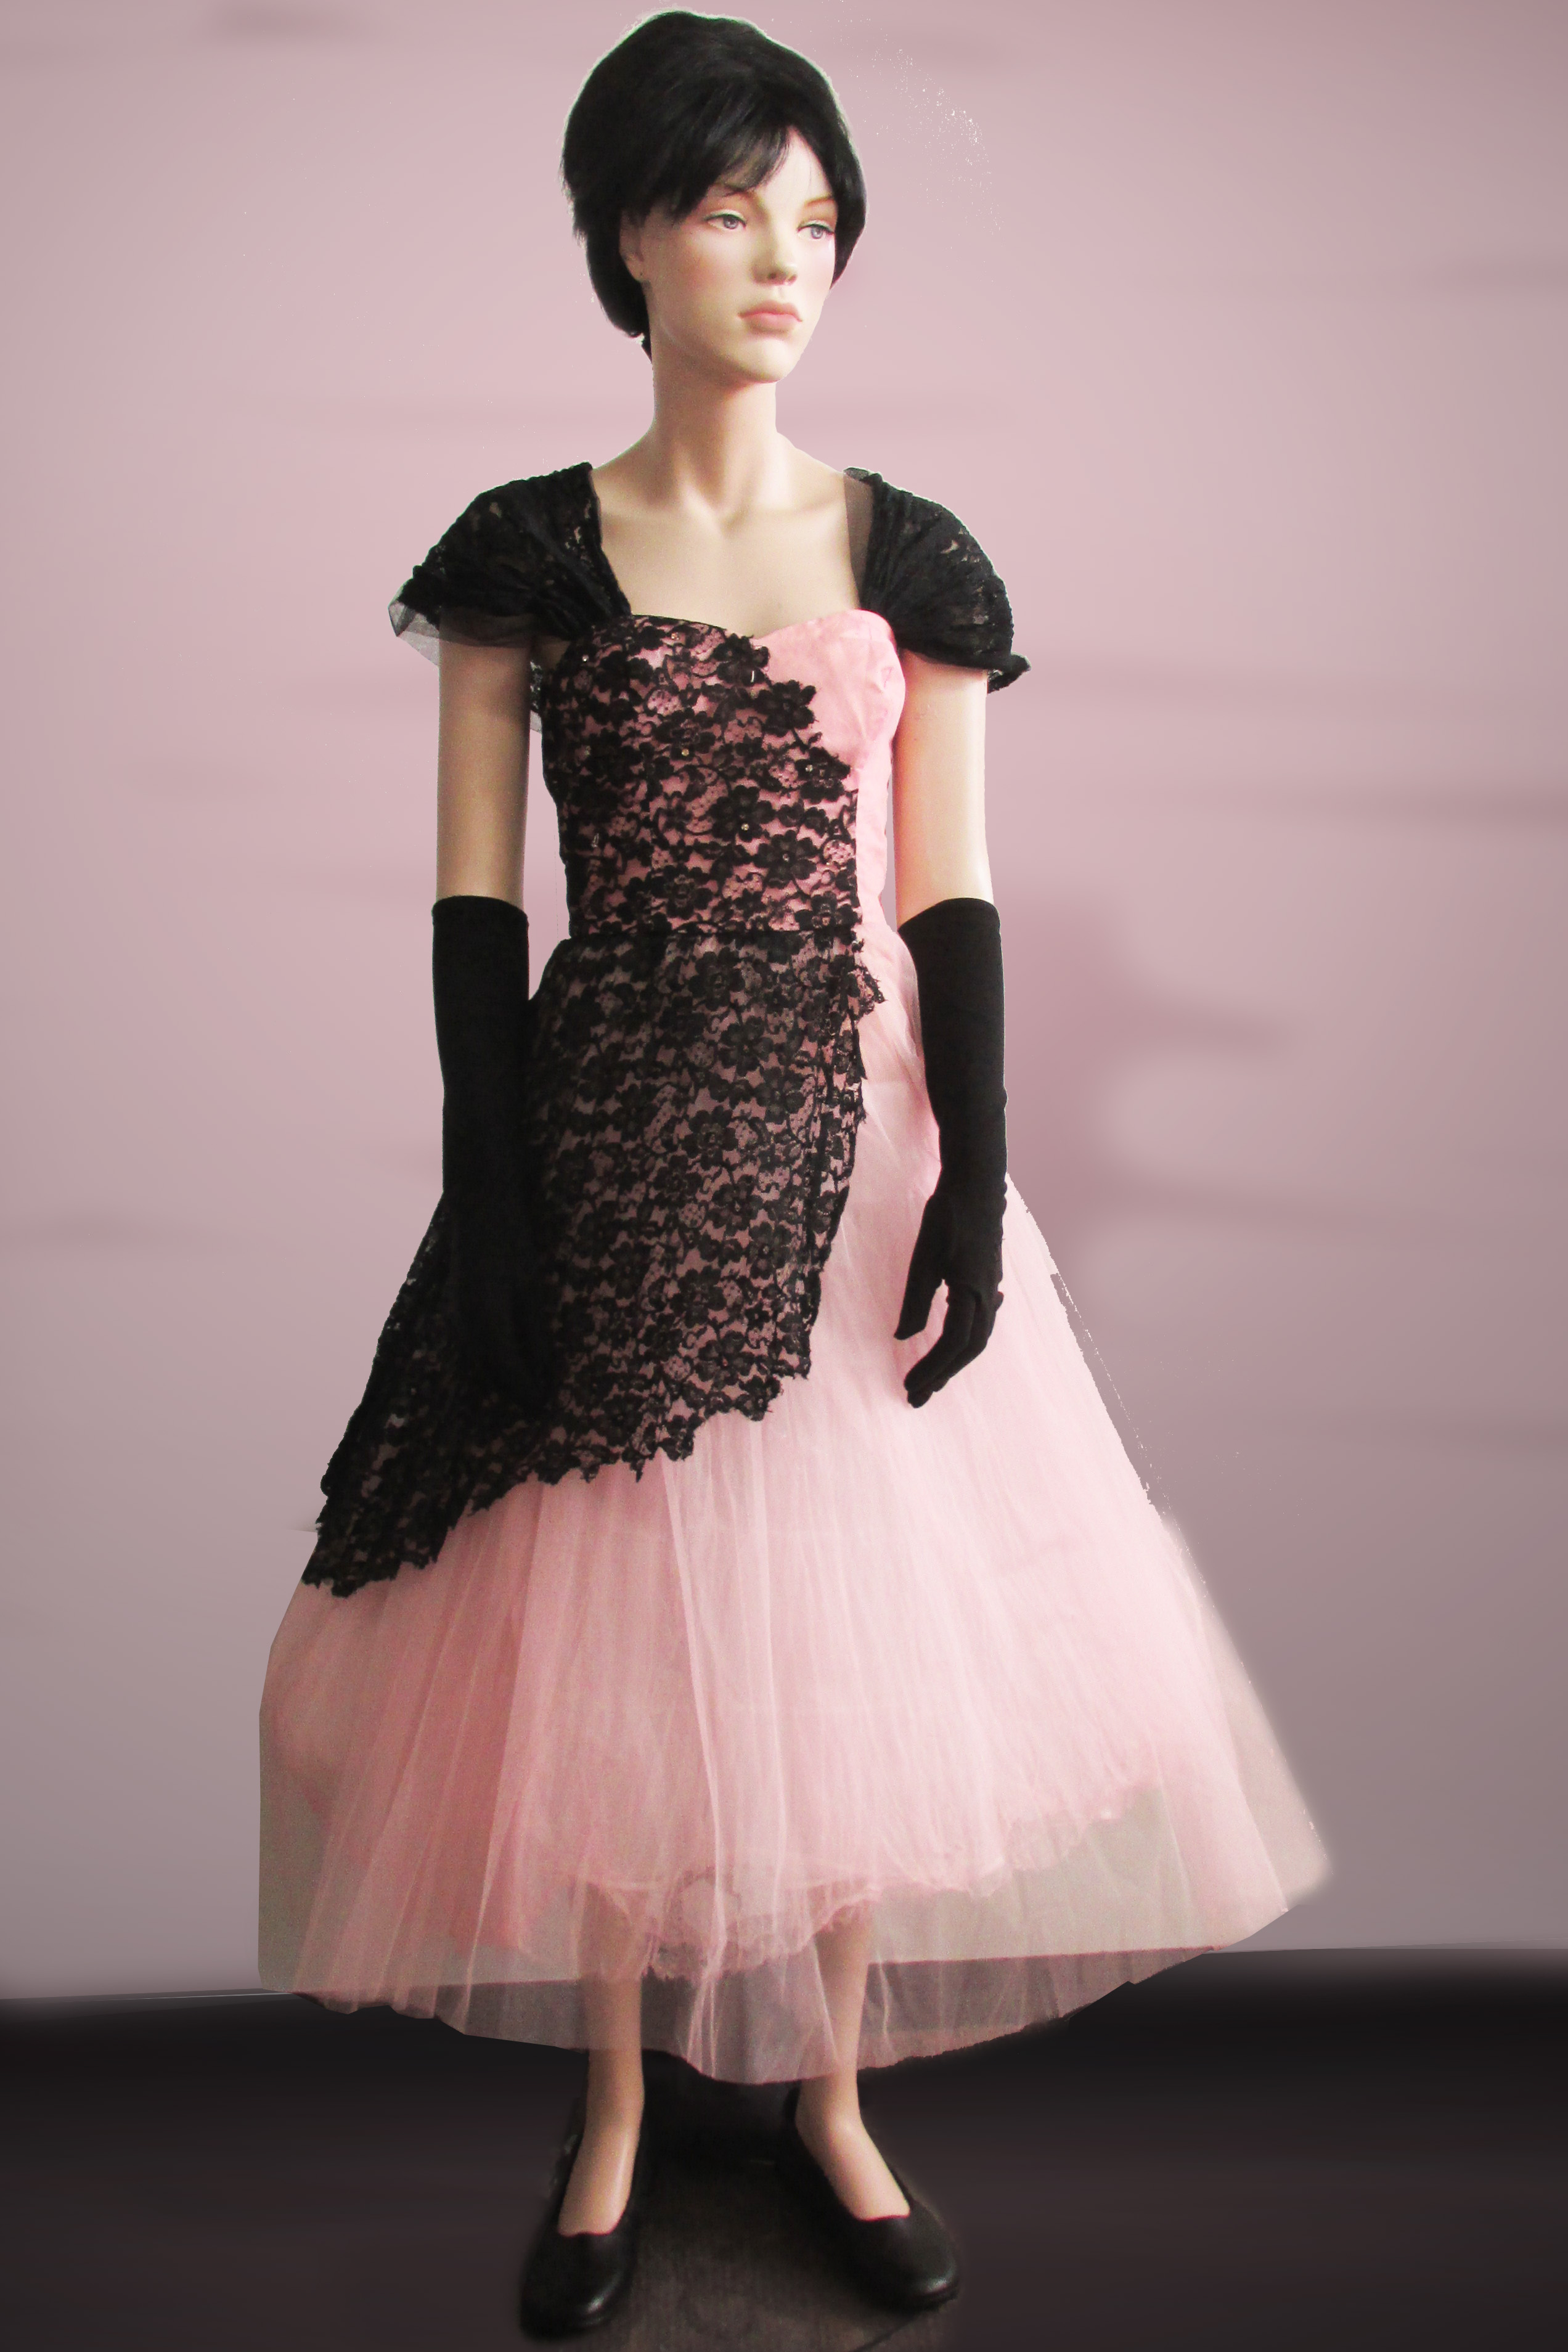 Cocktail Dress Pink Tulle with Black Lace 1950s